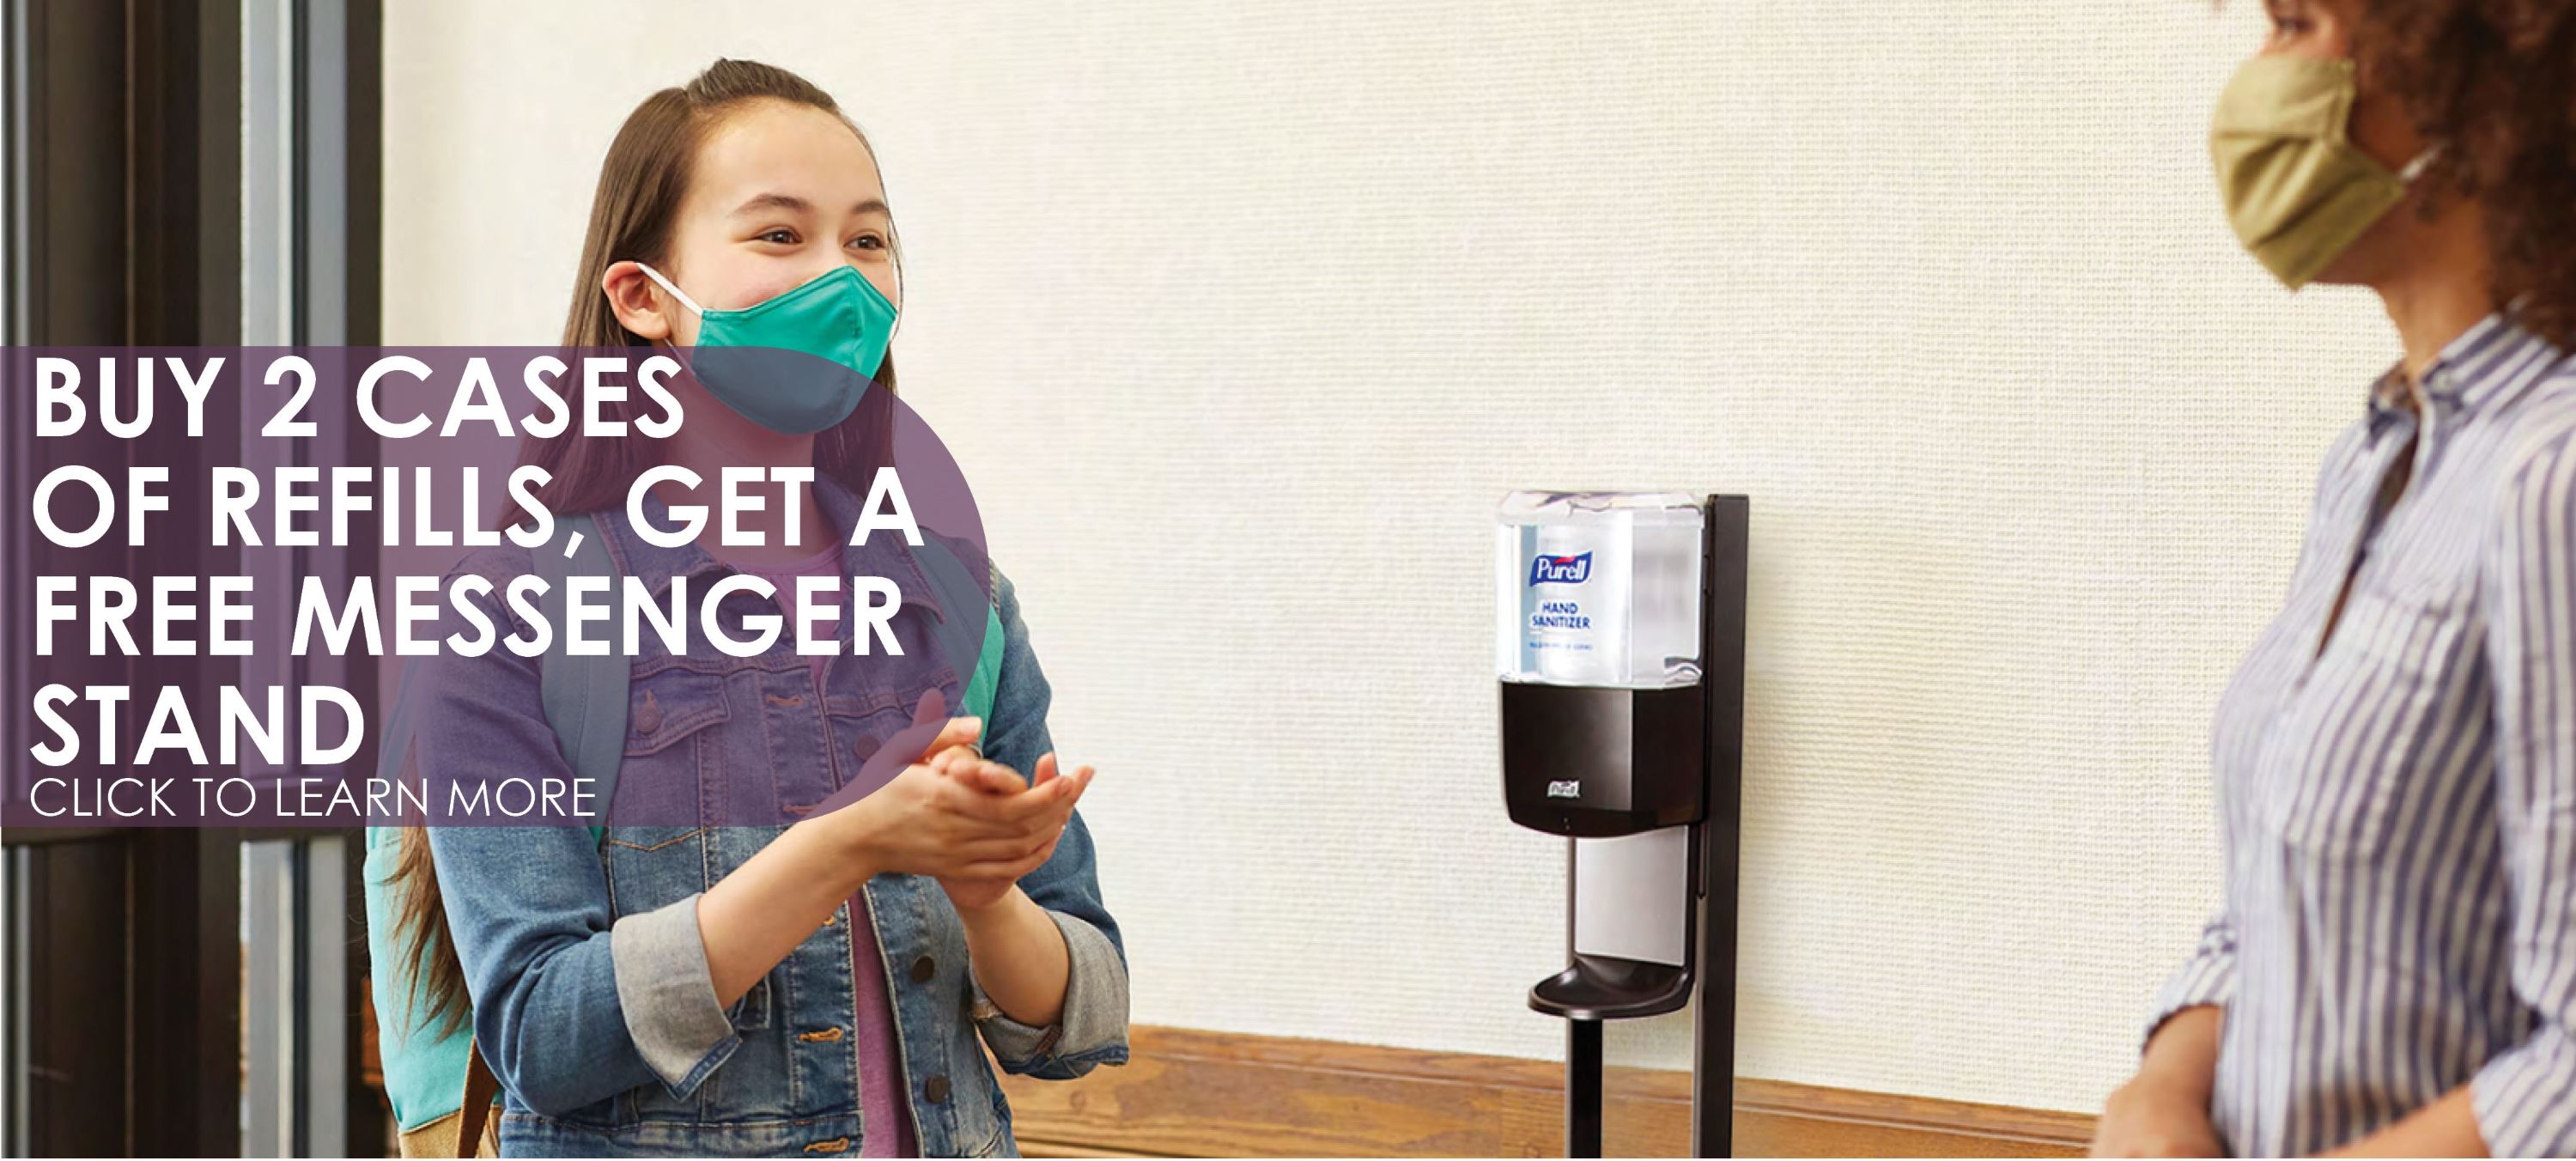 purell messenger stand promotion